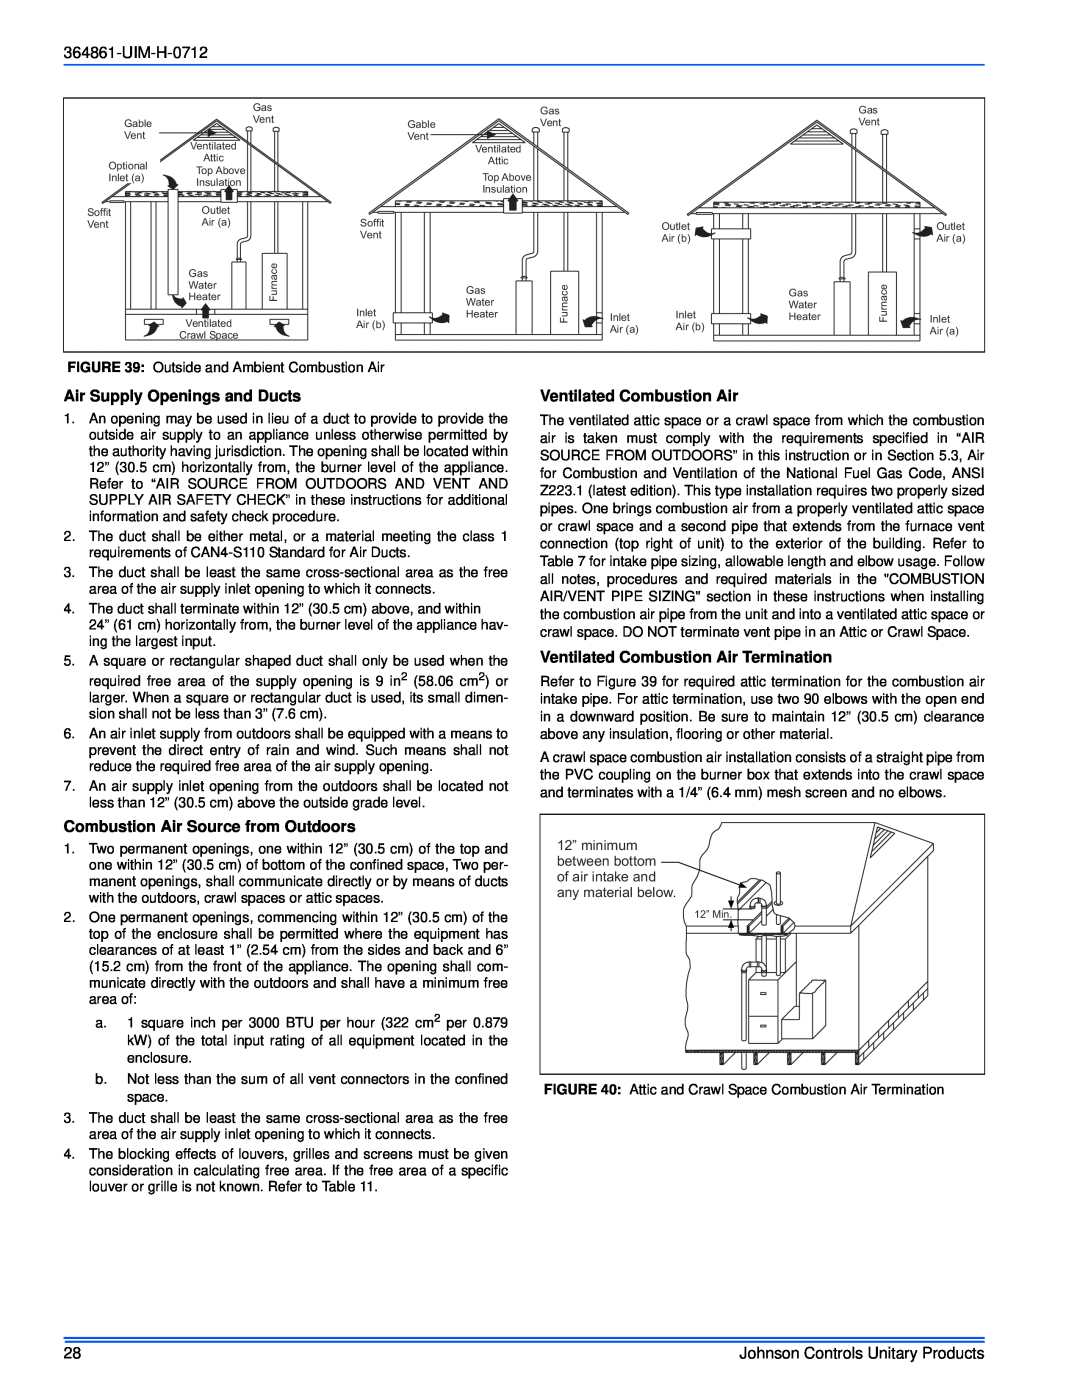 Johnson Controls TG9S'MP, GG9S'MP installation manual UIM-H-0712, Air Supply Openings and Ducts, Ventilated Combustion Air 